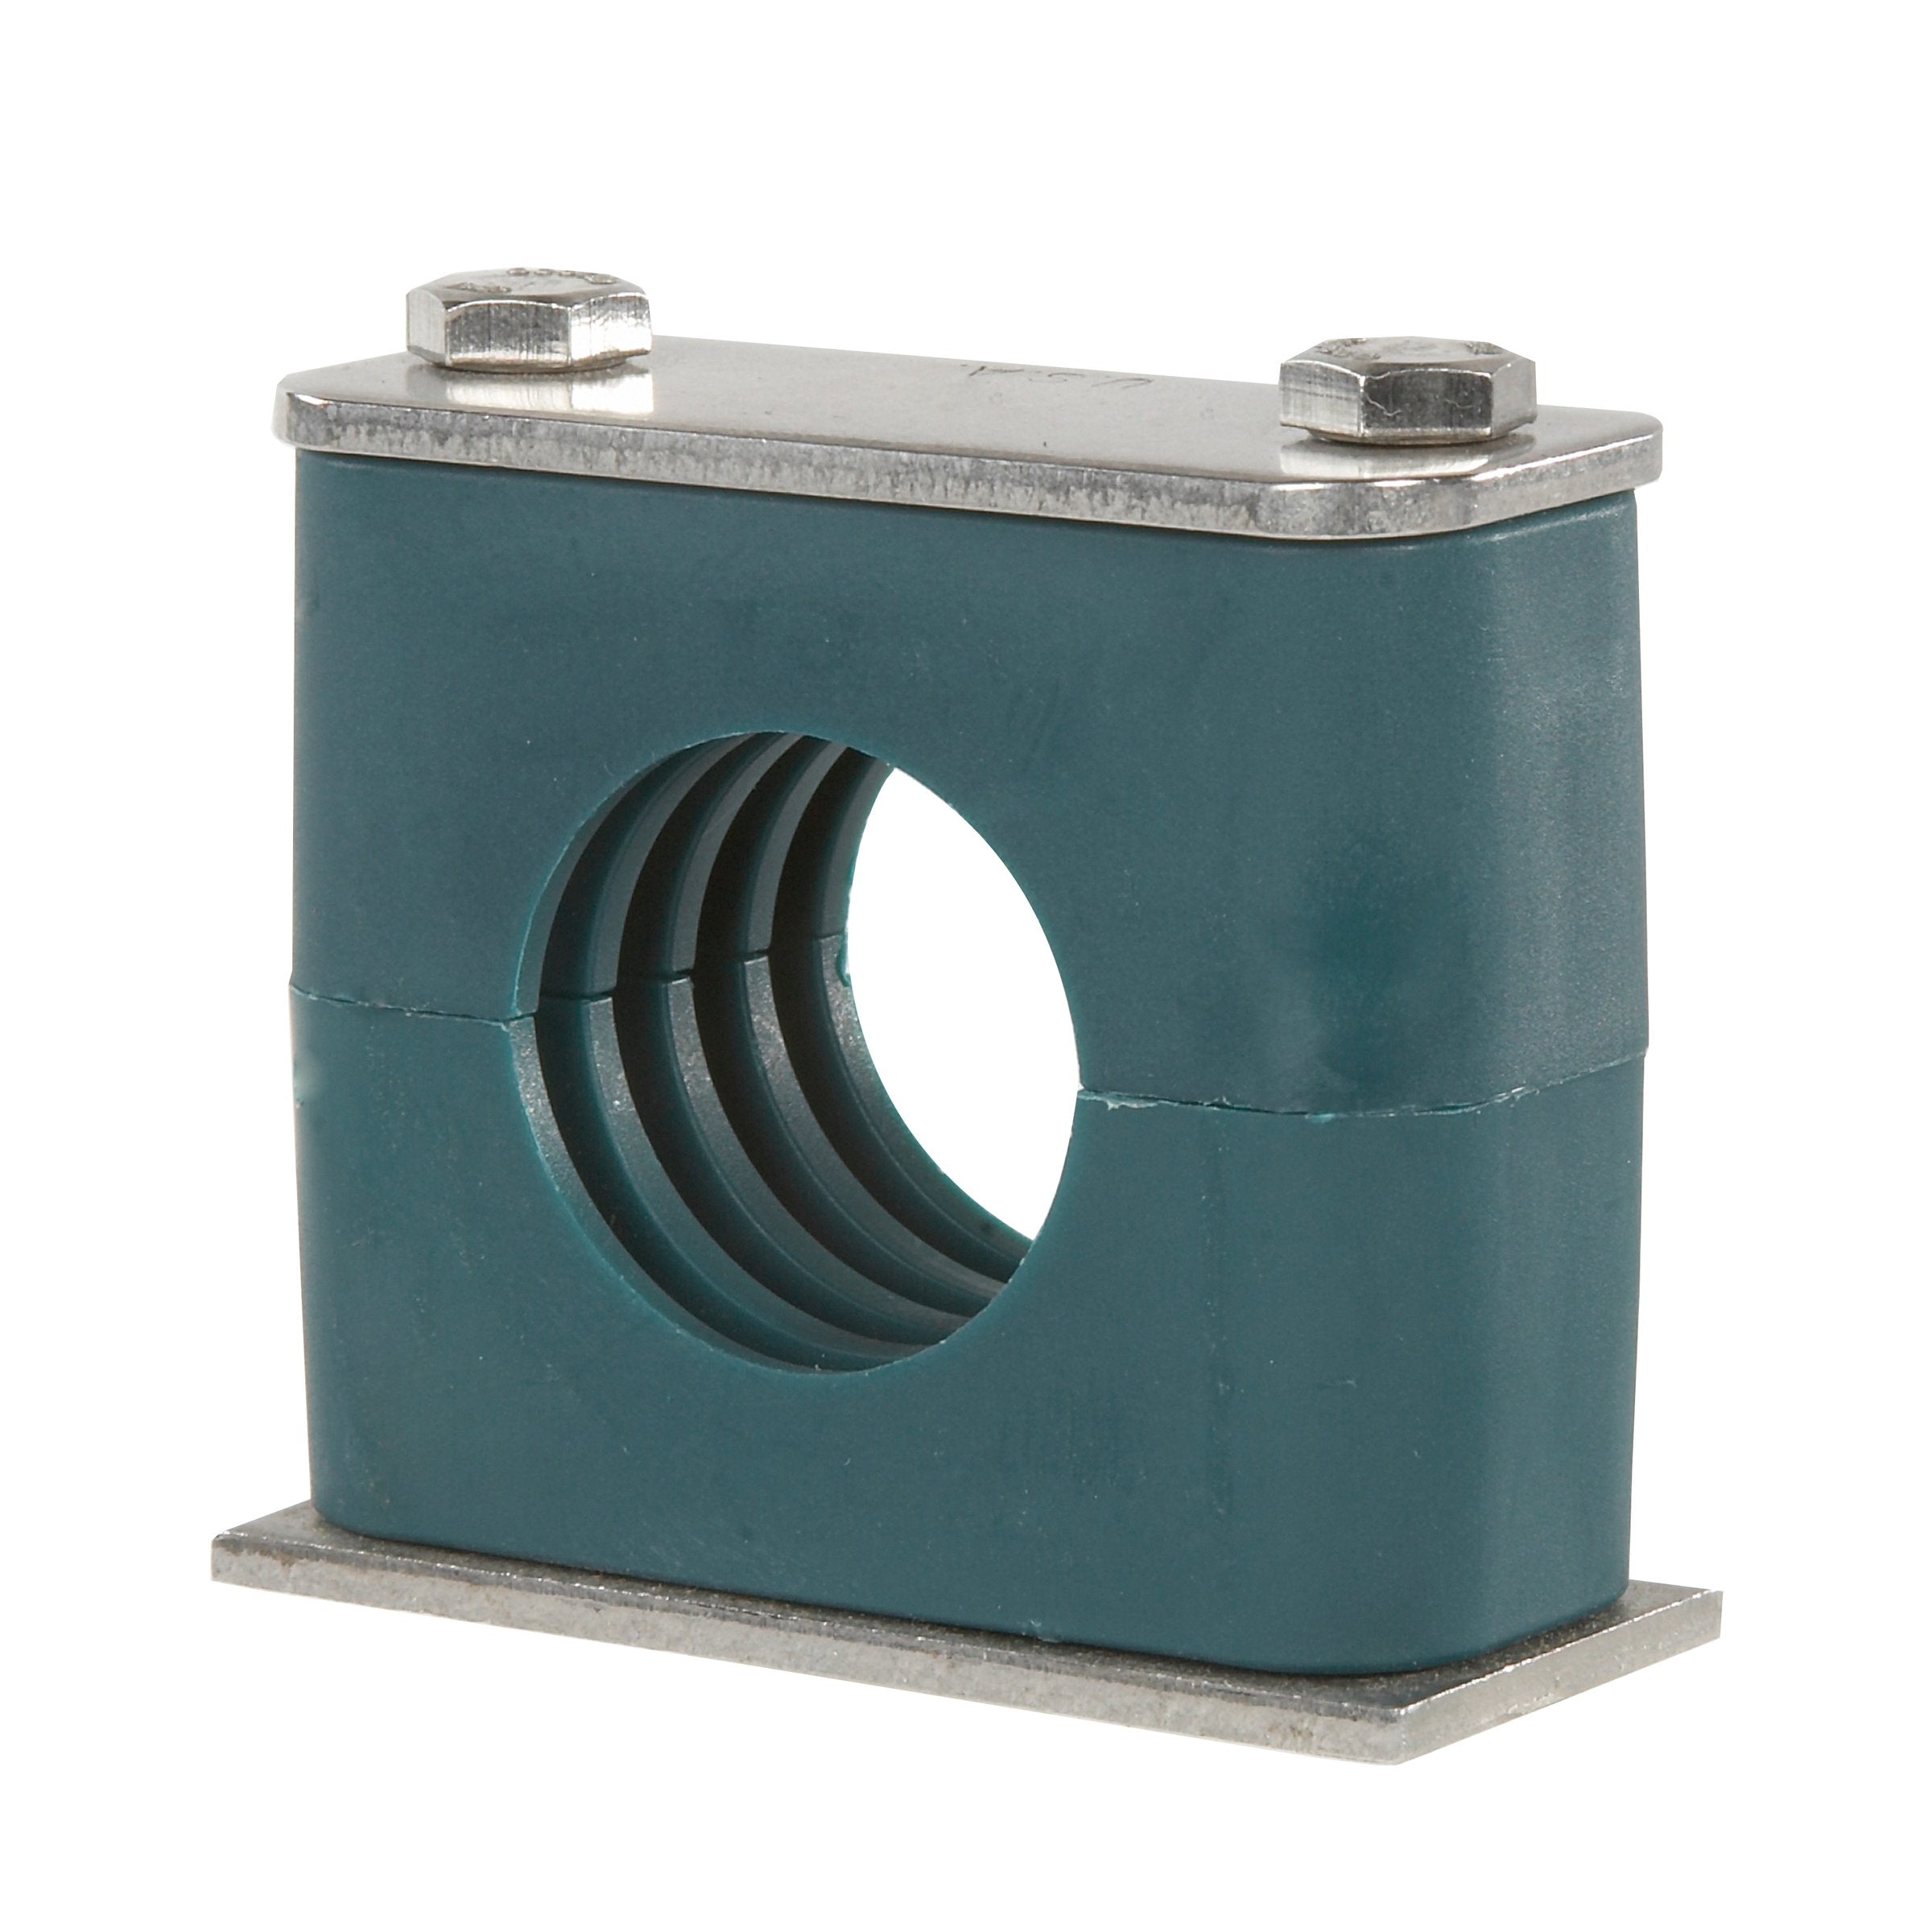 SP-216-PP-DP-AS-U-W10 : Stauff Clamp, Single Weld Plate, 0.625 inch (16mm) OD, for 5/8" Tube, Green PP Insert, Profiled Interior, Carbon Steel